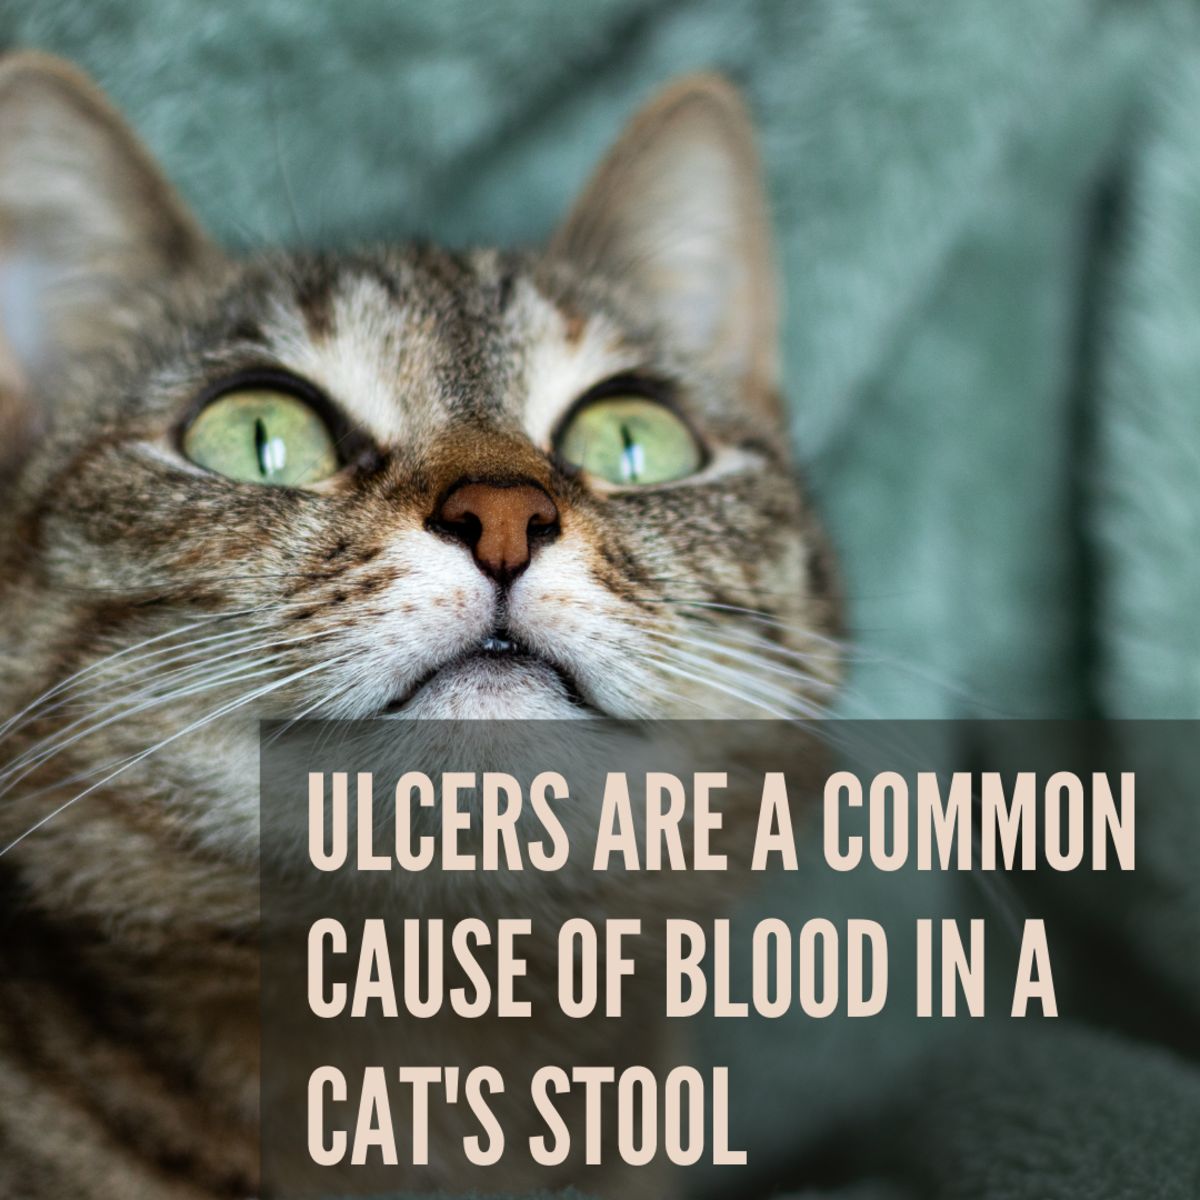 If you see blood in your cat's stool, don't freak out! It's most likely caused by an ulcer or a small bone. Both are easily treated.